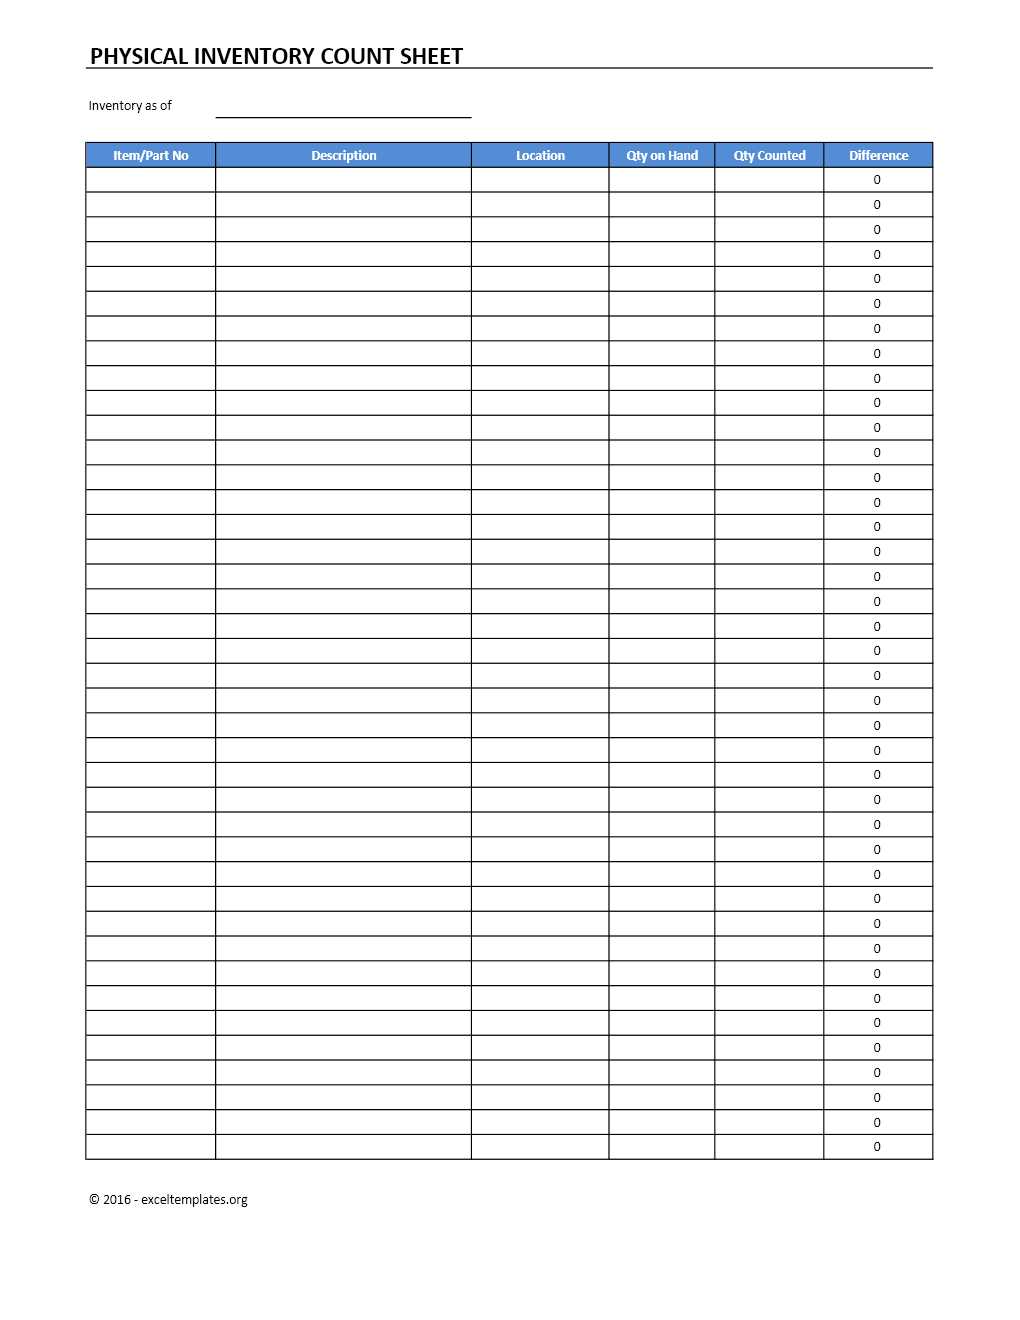 Physical Inventory Count Sheet Excel Template